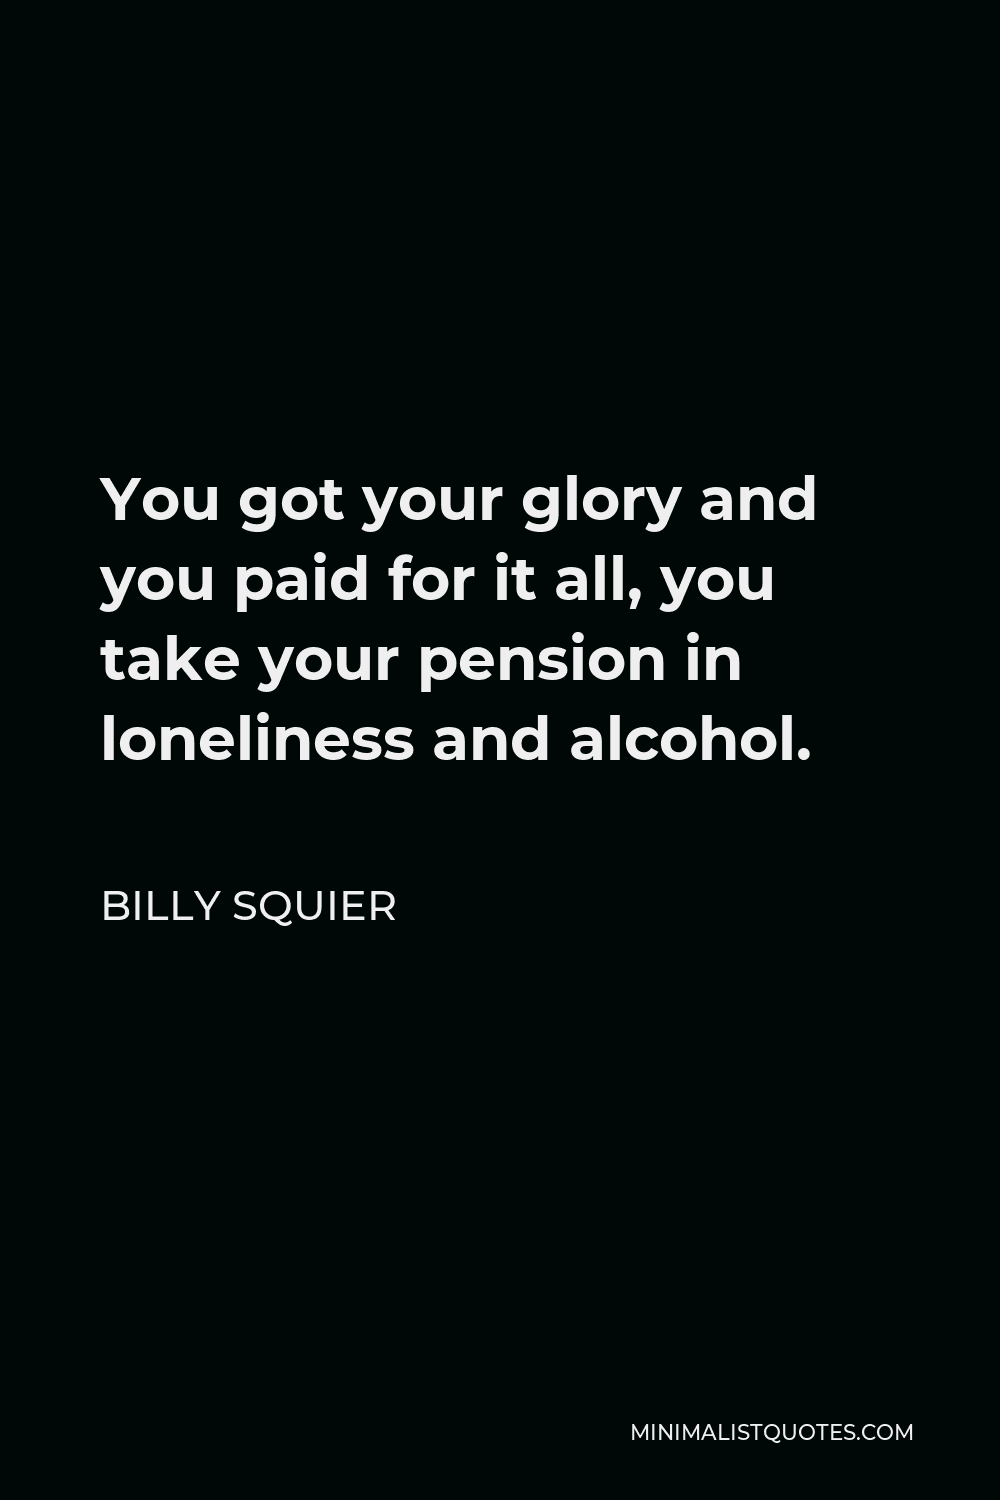 Billy Squier Quote - You got your glory and you paid for it all, you take your pension in loneliness and alcohol.